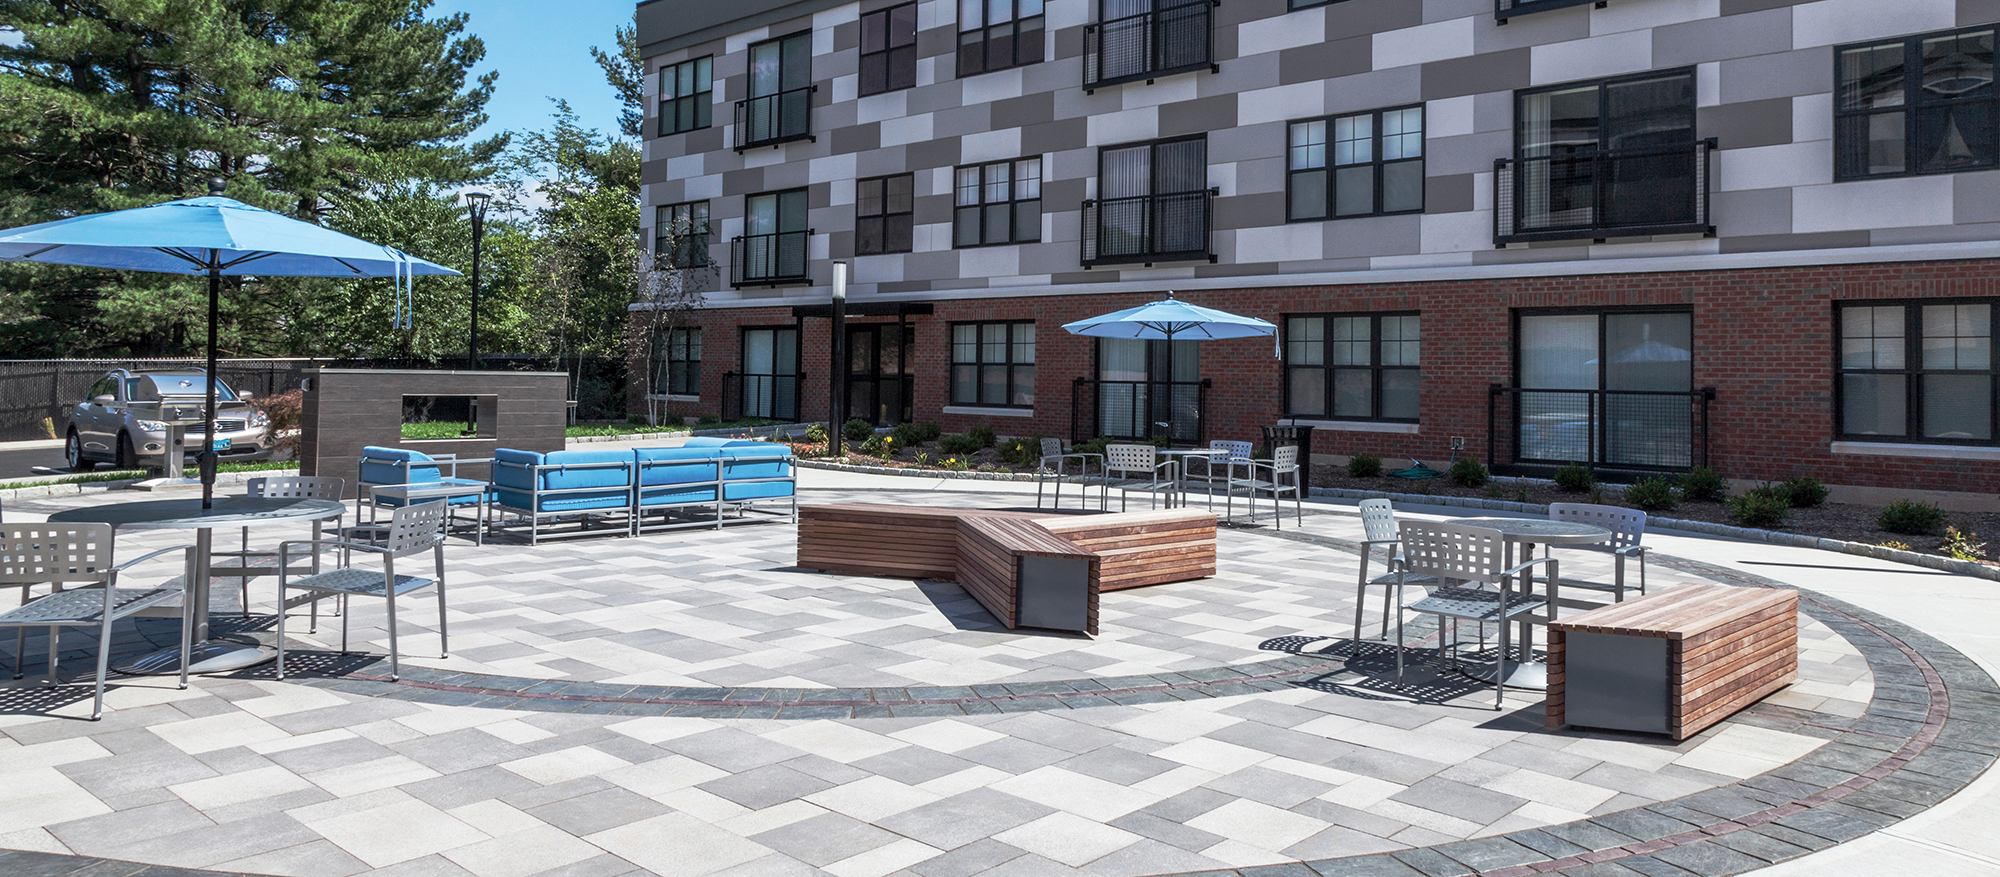 Grey and white Umbriano pavers match the bricks of the apartment building in this outdoor amenity space.